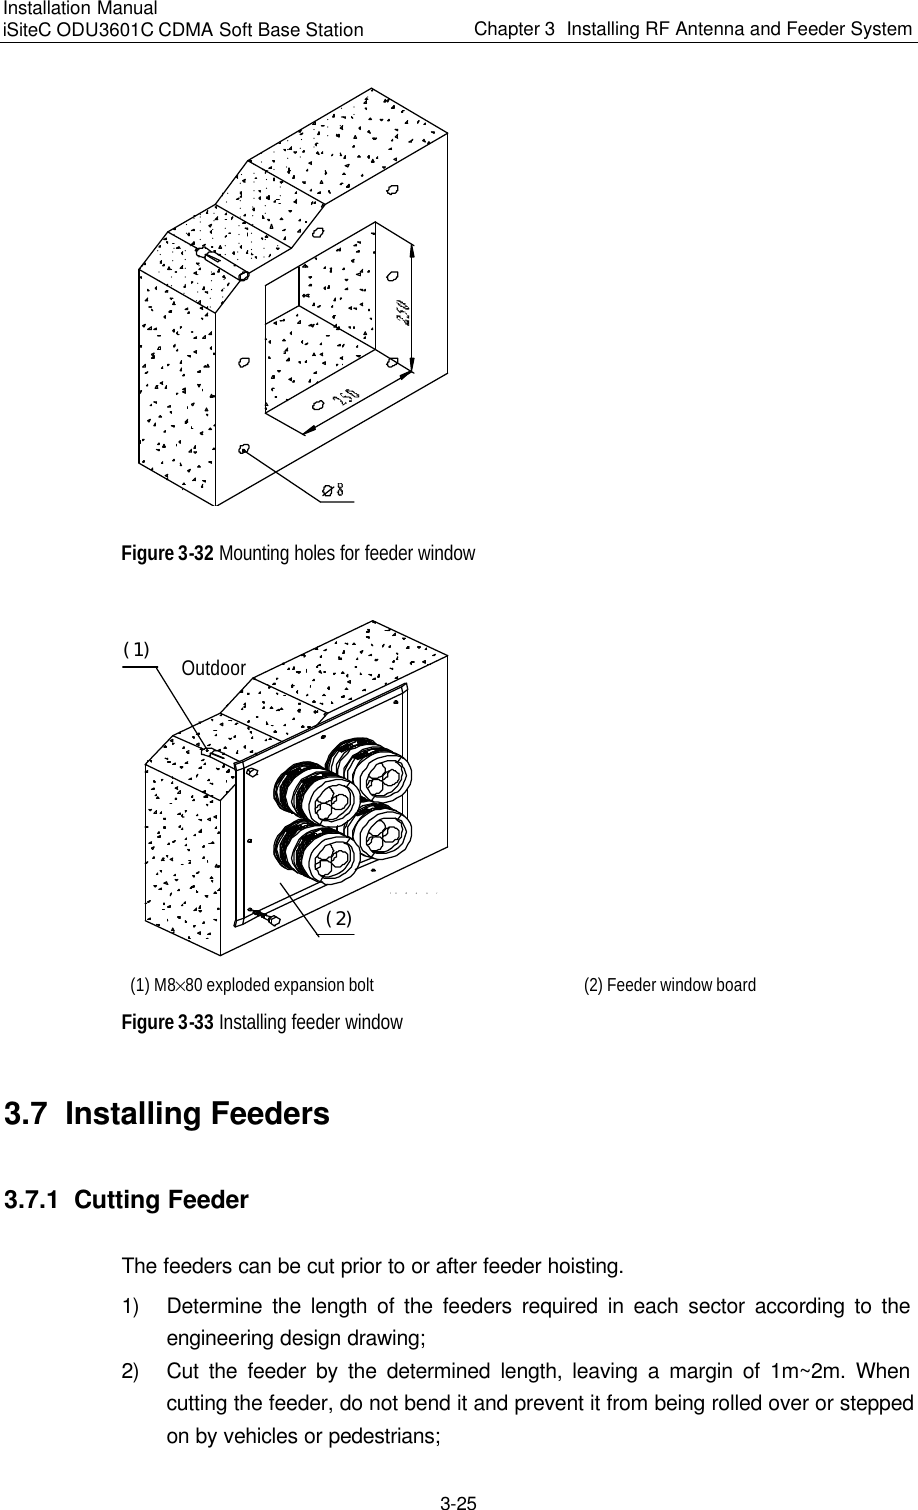 Installation Manual   iSiteC ODU3601C CDMA Soft Base Station Chapter 3  Installing RF Antenna and Feeder System  3-25  Figure 3-32 Mounting holes for feeder window IndoorOutdoor（１）（２） (1) M8%80 exploded expansion bolt   (2) Feeder window board Figure 3-33 Installing feeder window 3.7  Installing Feeders 3.7.1  Cutting Feeder The feeders can be cut prior to or after feeder hoisting. 1) Determine the length of the feeders required in each sector according to the engineering design drawing; 2) Cut the feeder by the determined length, leaving a margin of 1m~2m. When cutting the feeder, do not bend it and prevent it from being rolled over or stepped on by vehicles or pedestrians; 